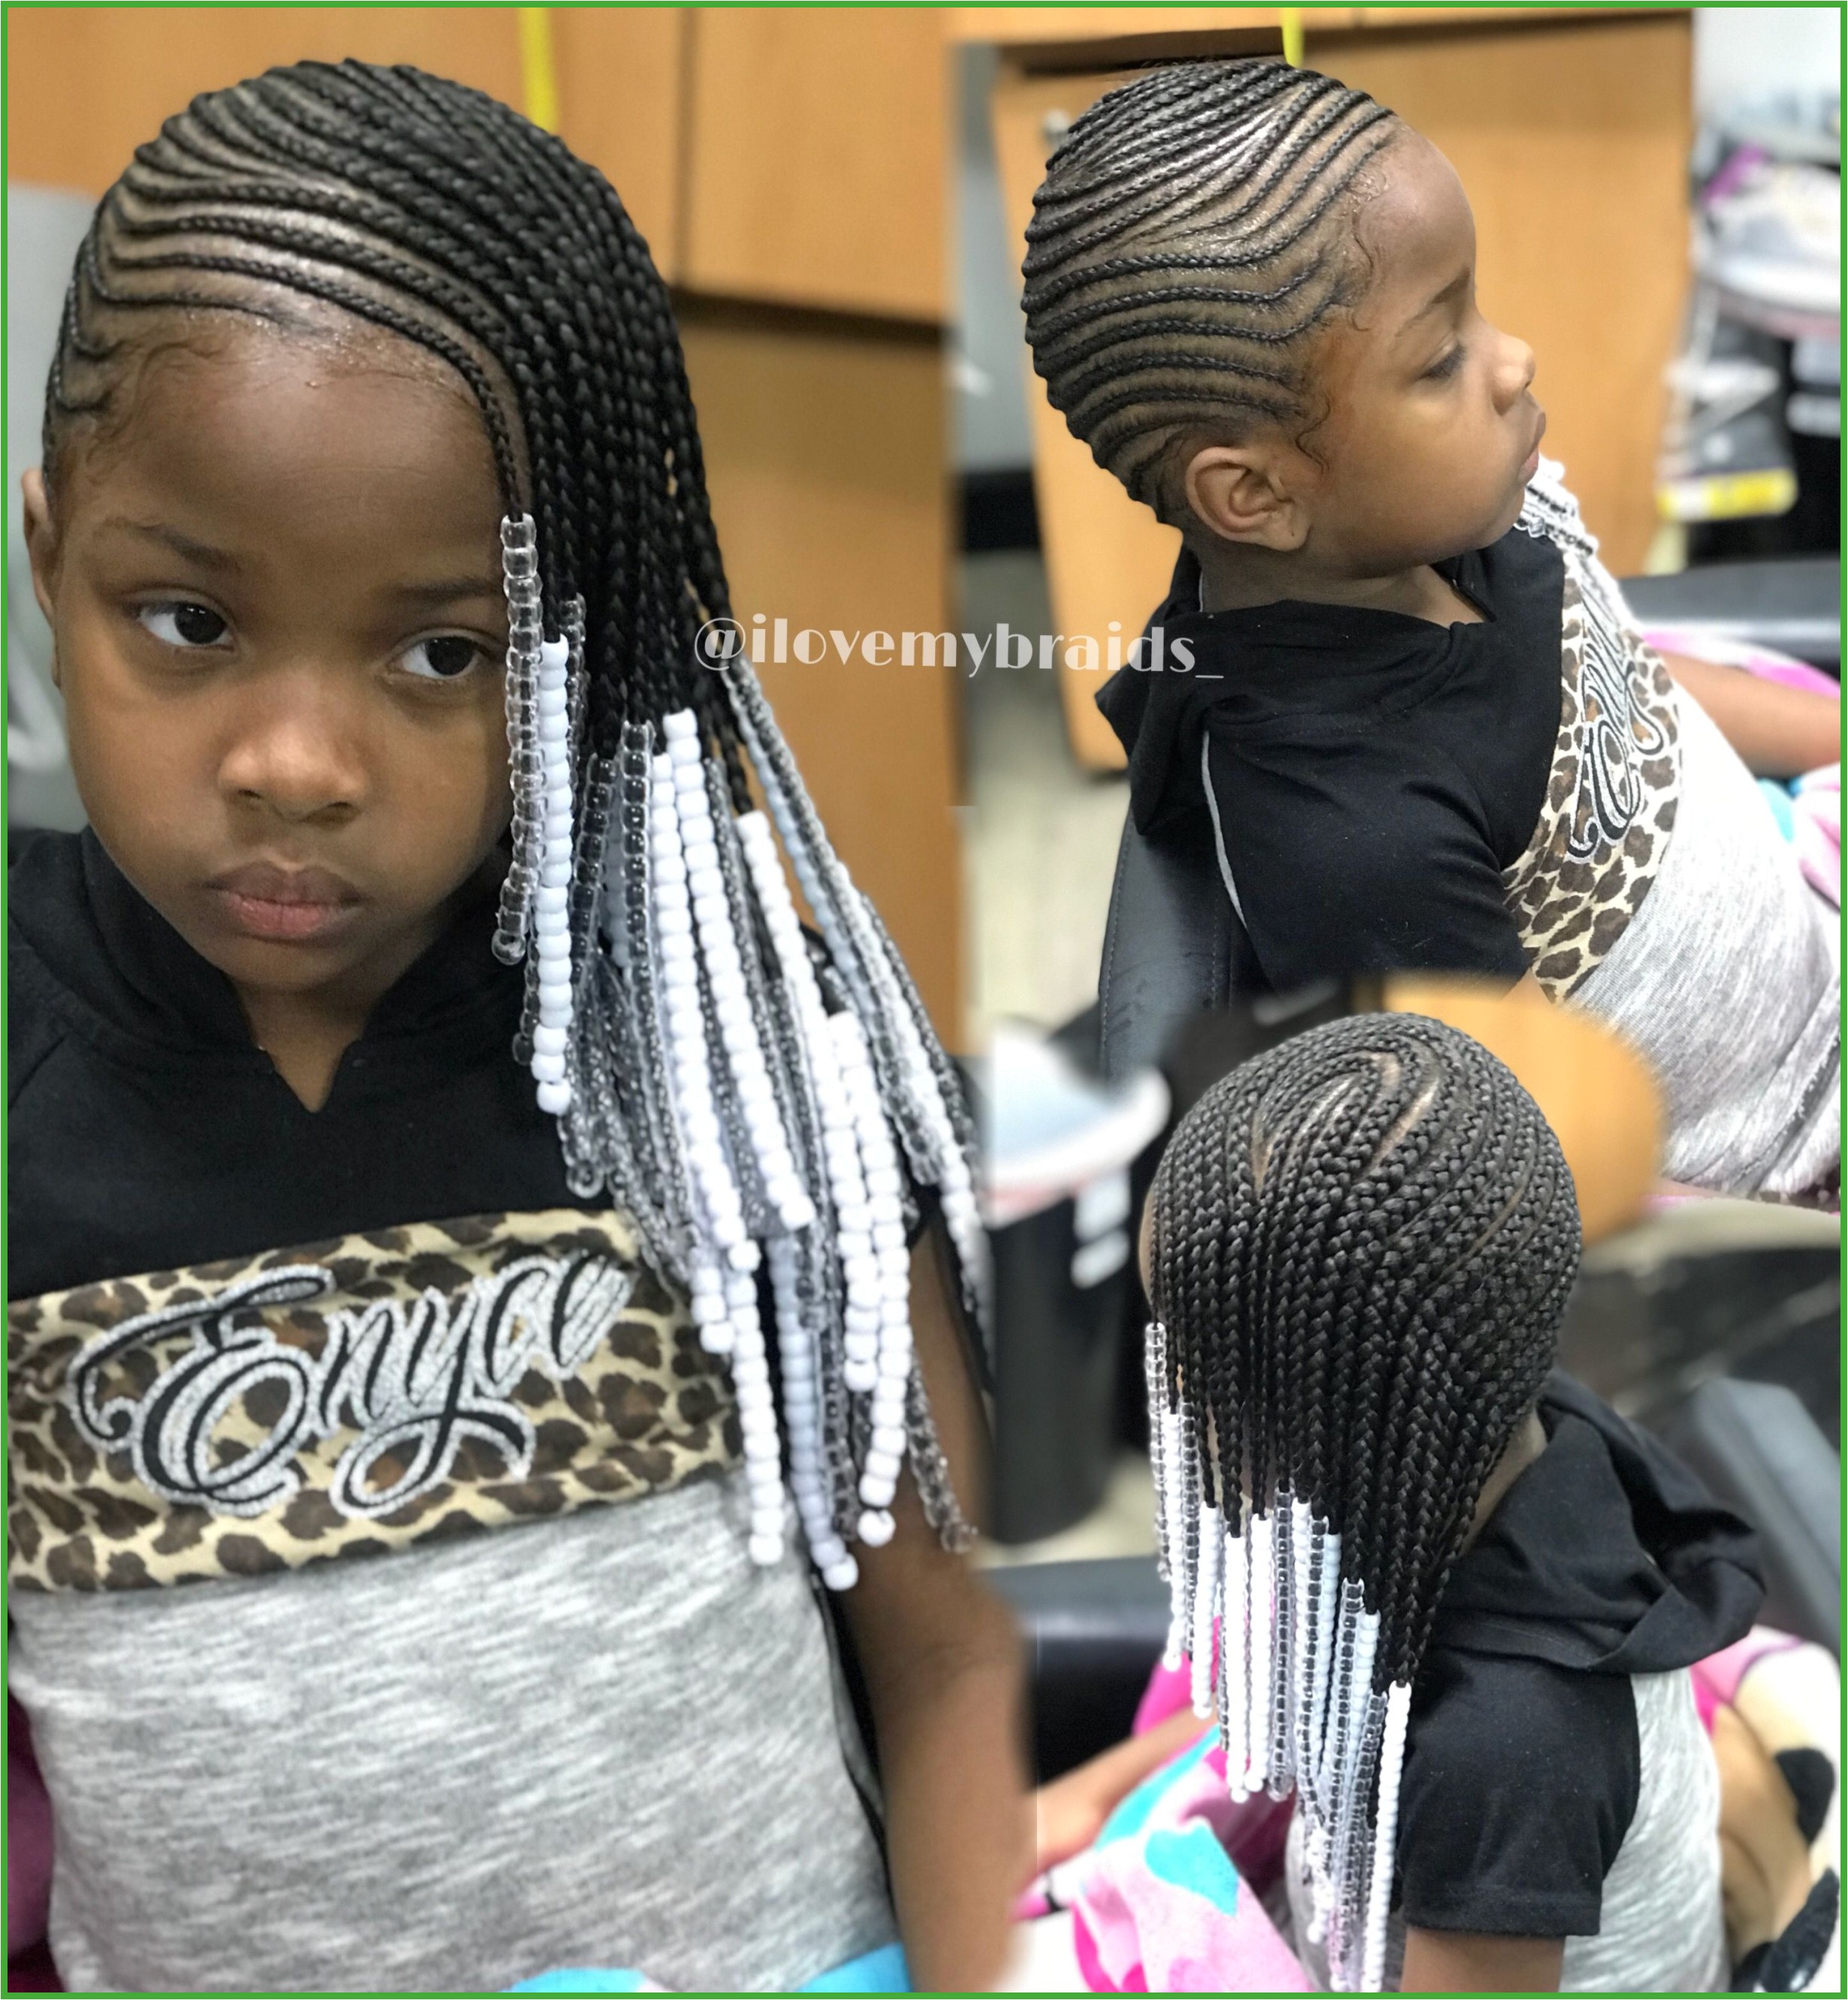 Black Kids Braids Hairstyles Braid Hairstyles Black Men You Re Going to Want to Wear